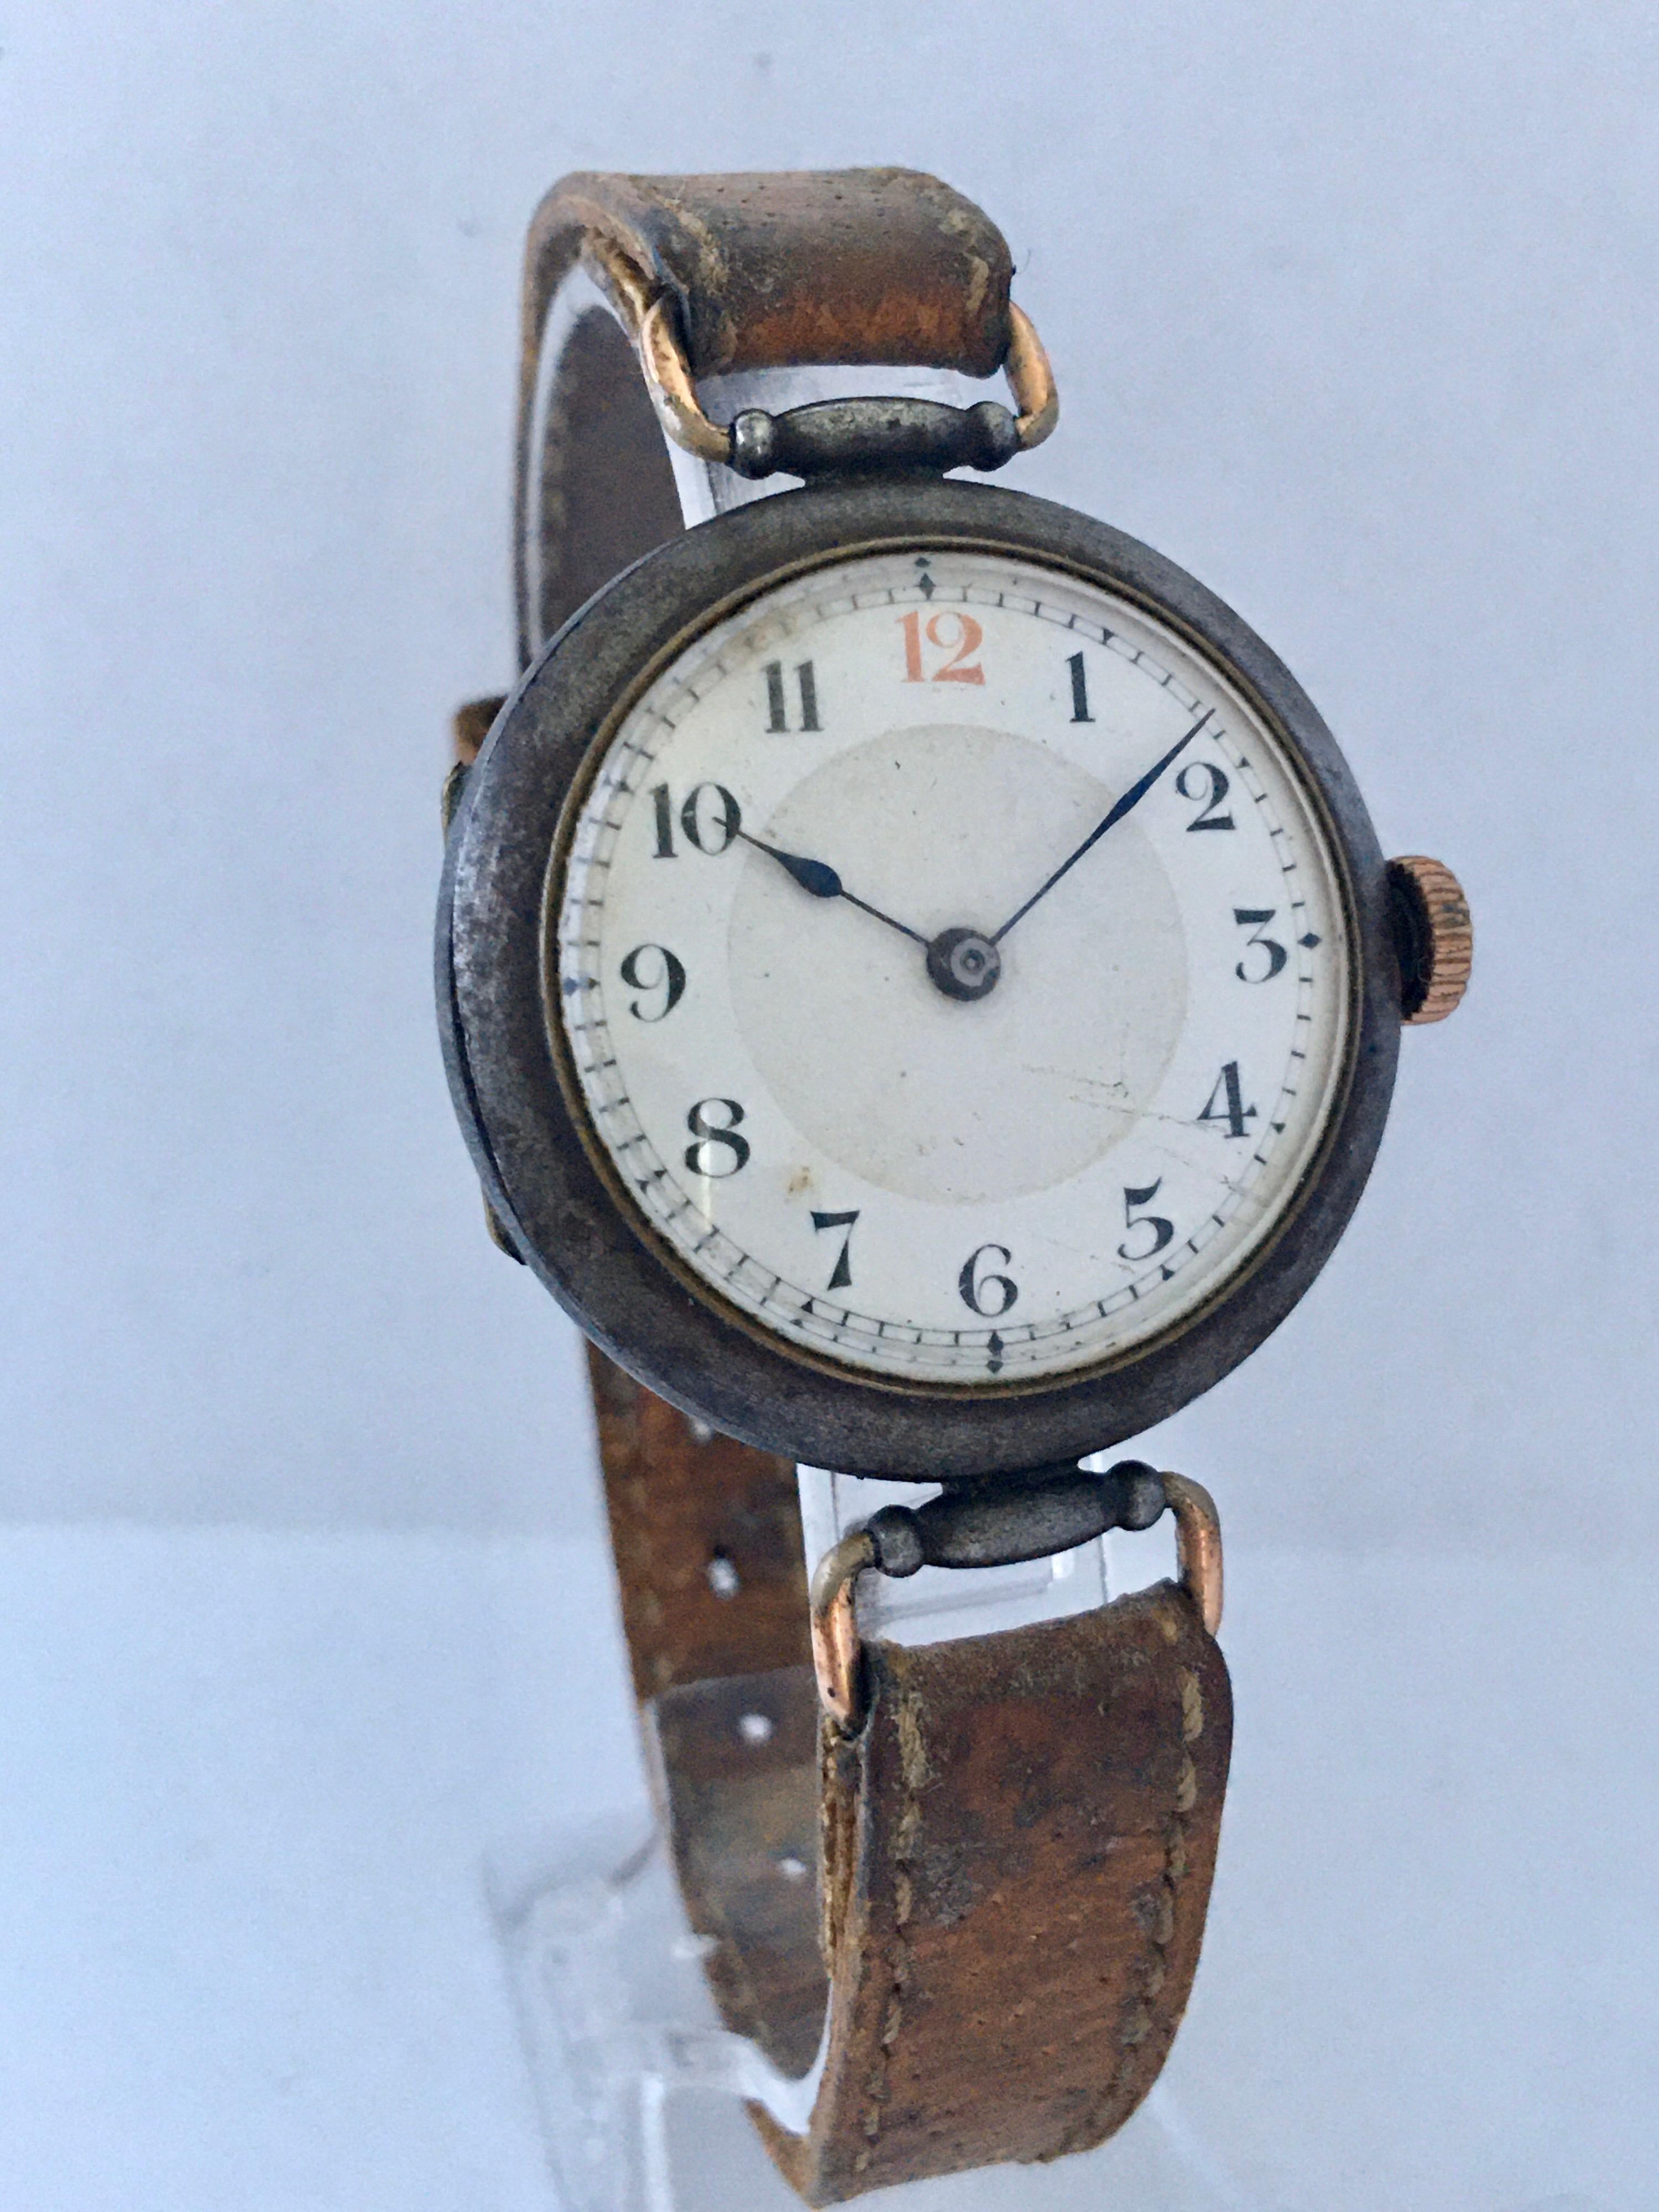 This beautiful antique transition mechanical watch is in good working condition and it is ticking well. The gunmetal(hunting) case is a bit tarnished and its old brown leather strap is worn but wearable the gold plated buckle strap is tarnished as